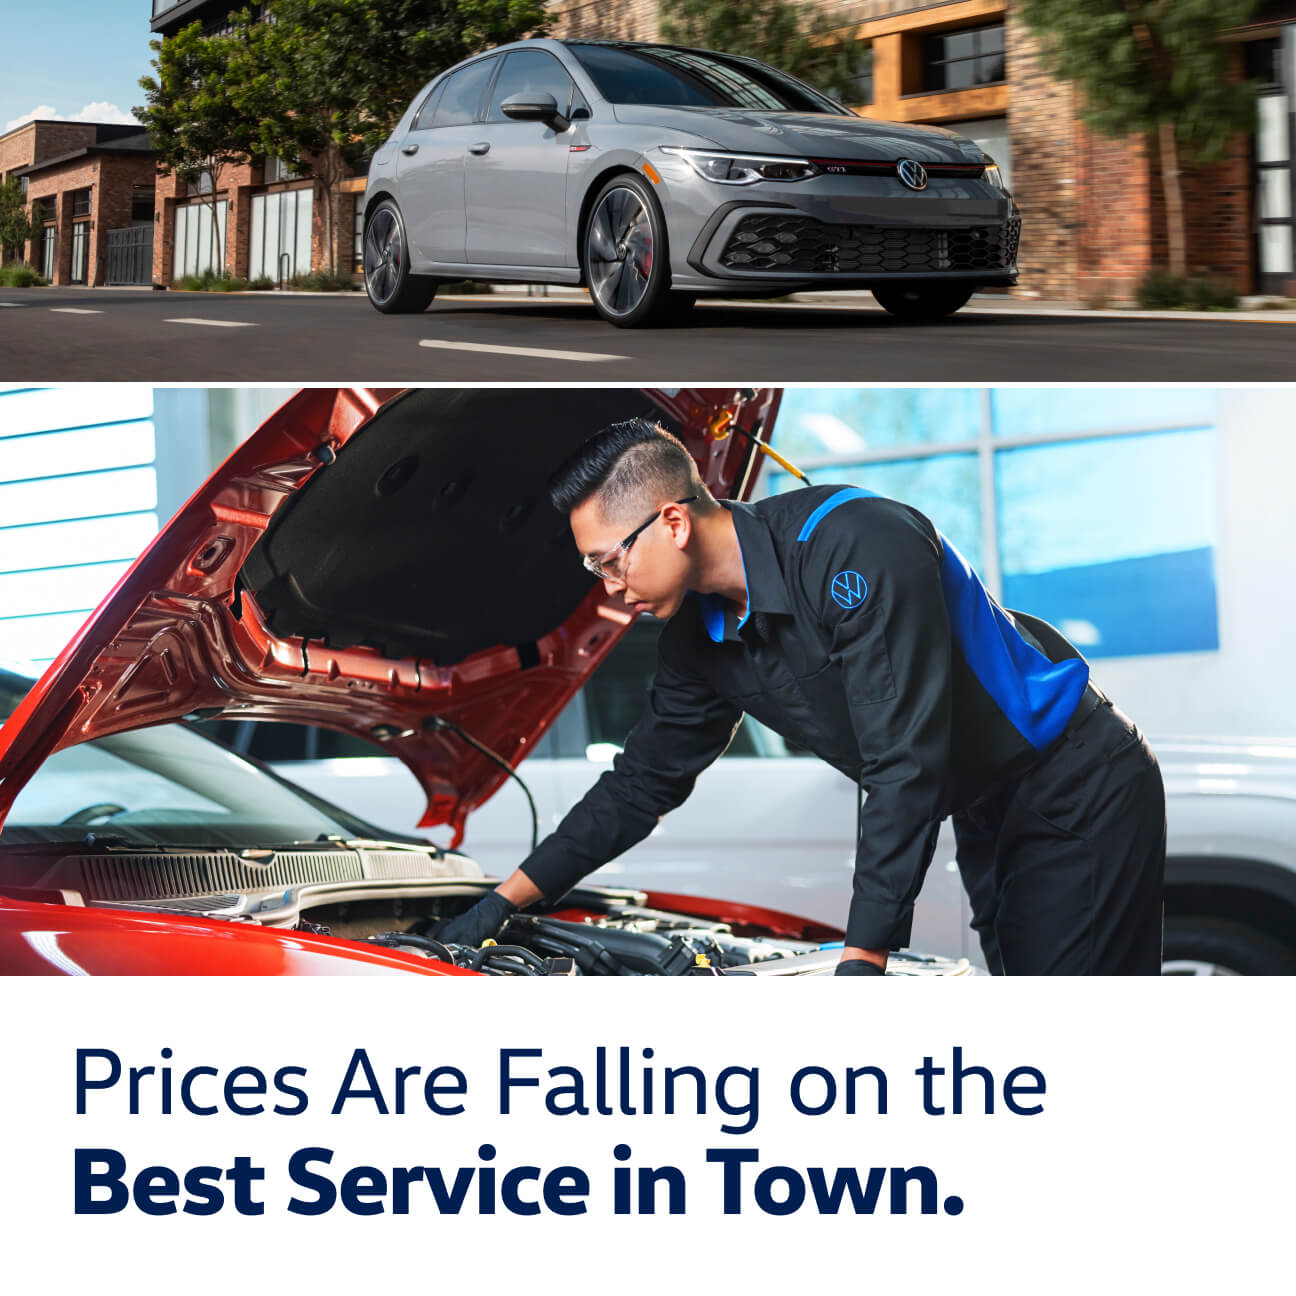 Prices are falling on the best service in town